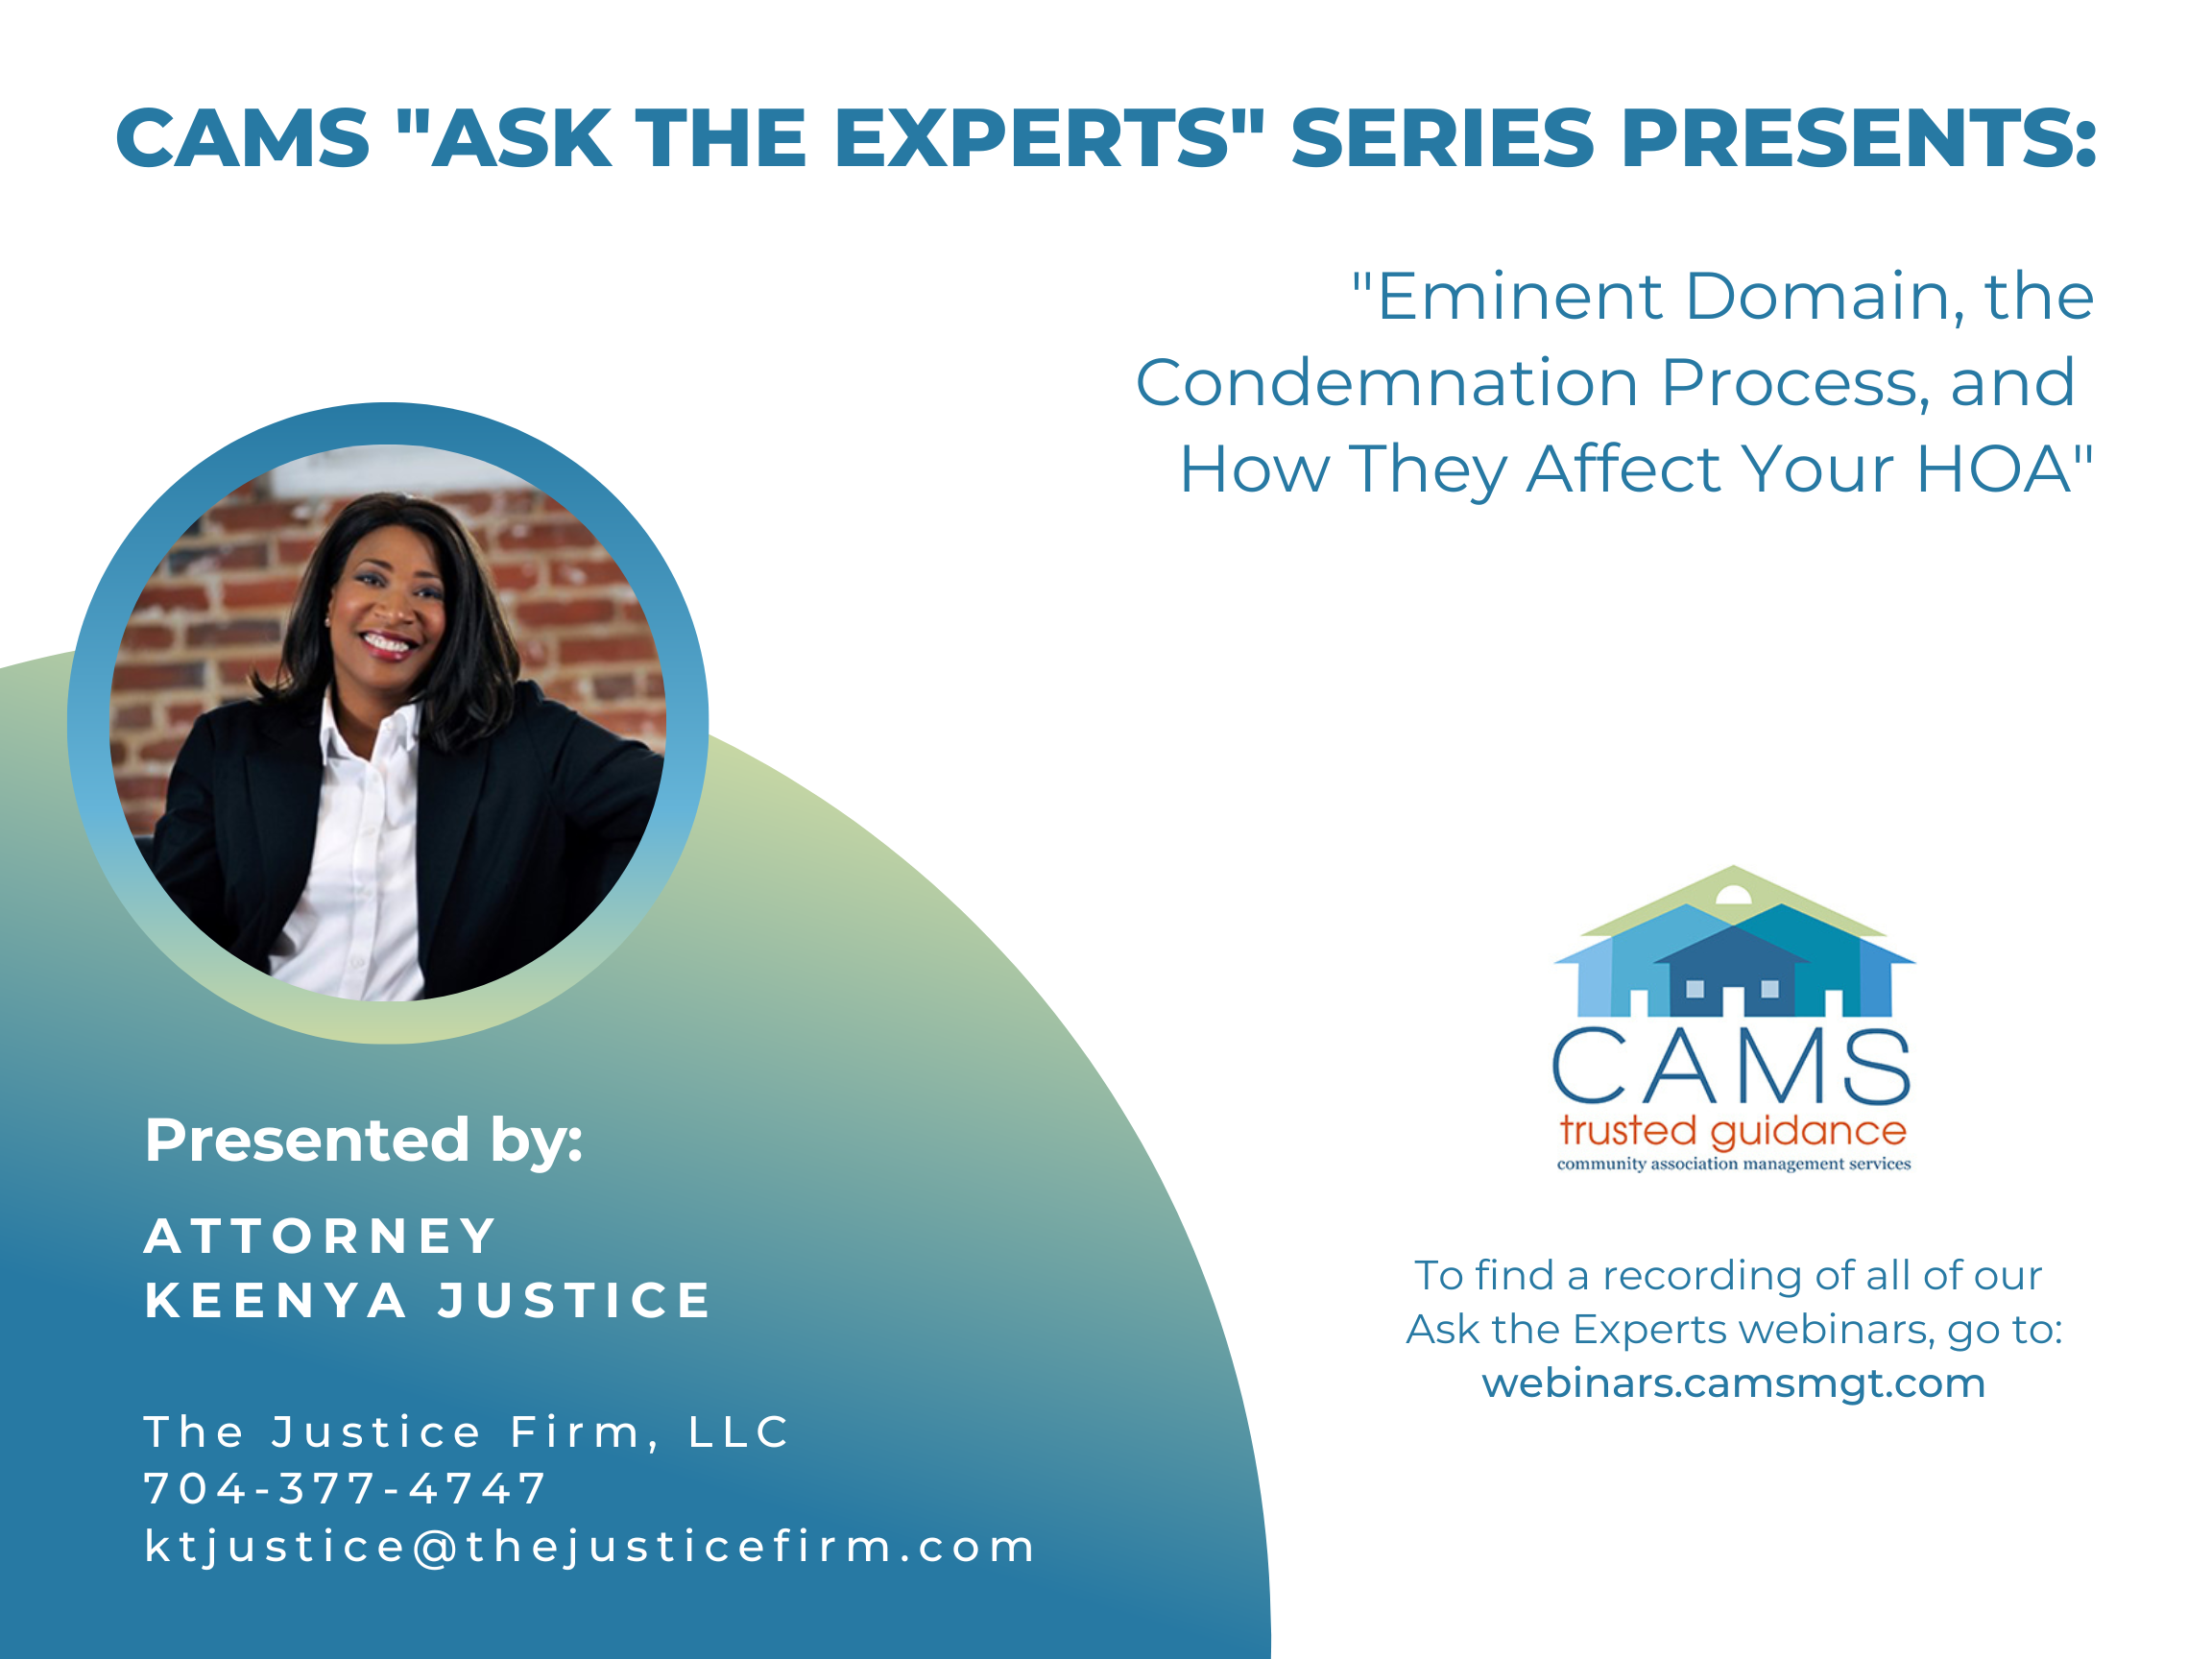 Eminent Domain, the Condemnation Process, and How They Impact Your HOA